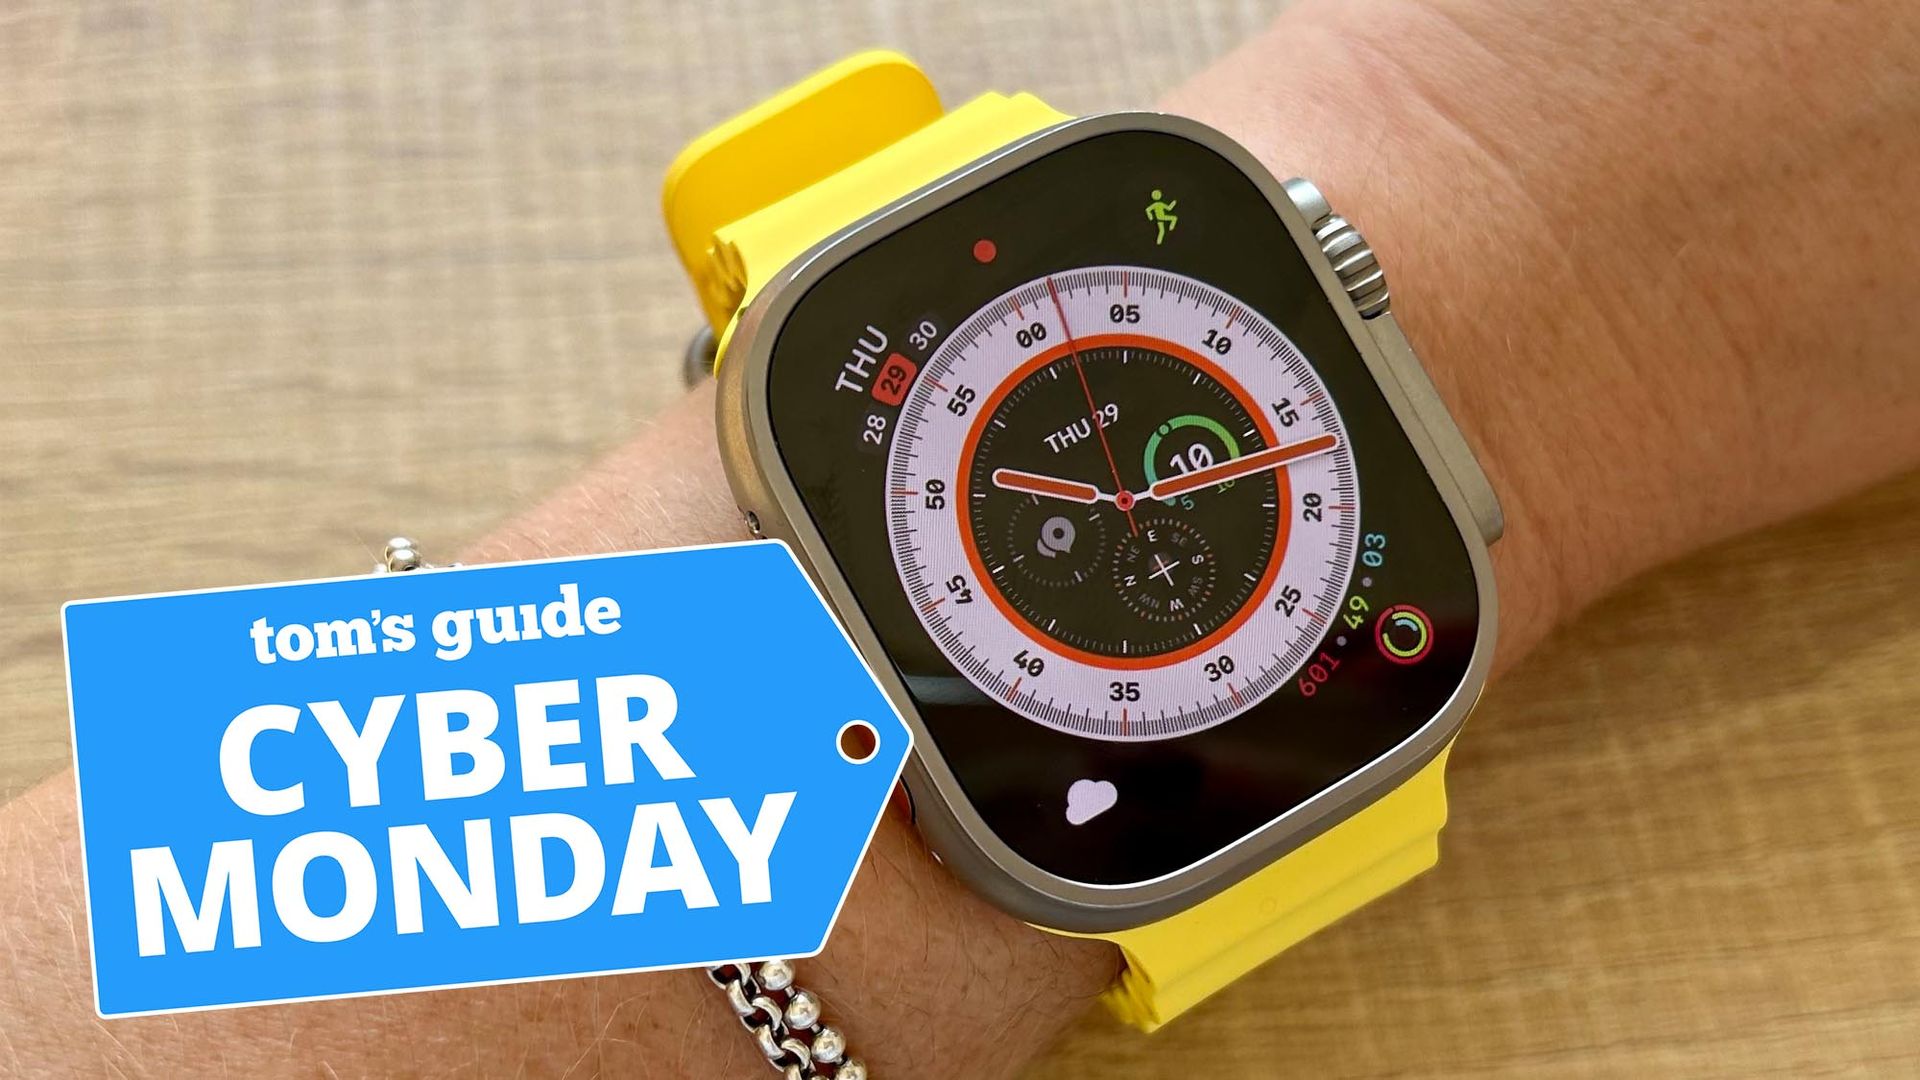 Cyber Monday Apple Watch deals — best sales you can still find Tom's